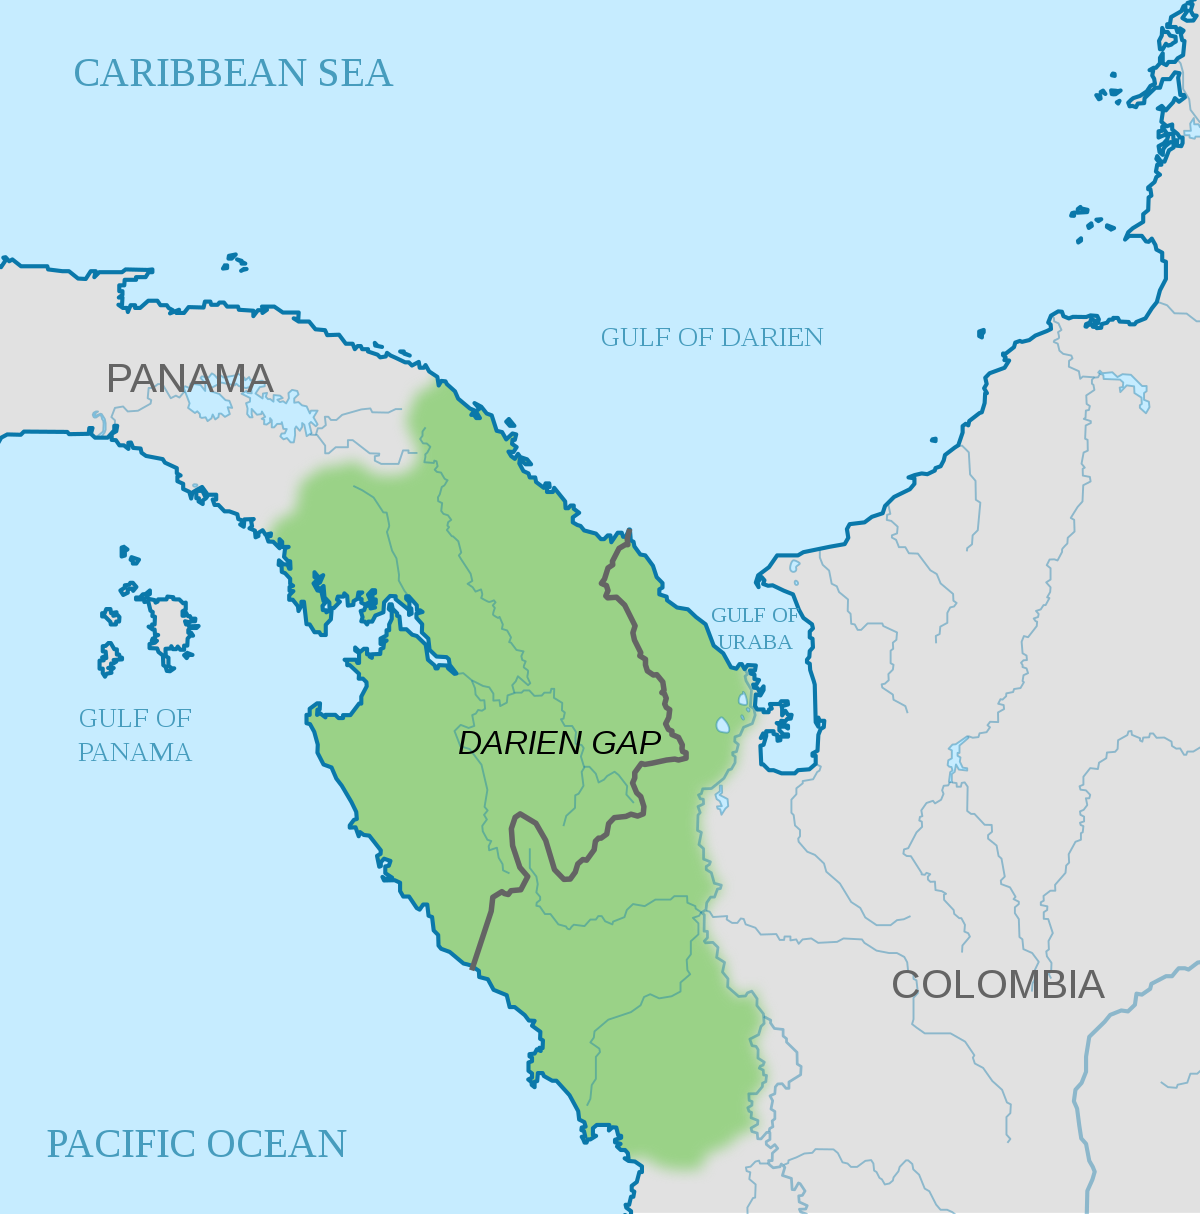 The Darien jungle that separates Panama and Colombia. (Photo Internet reproduction)